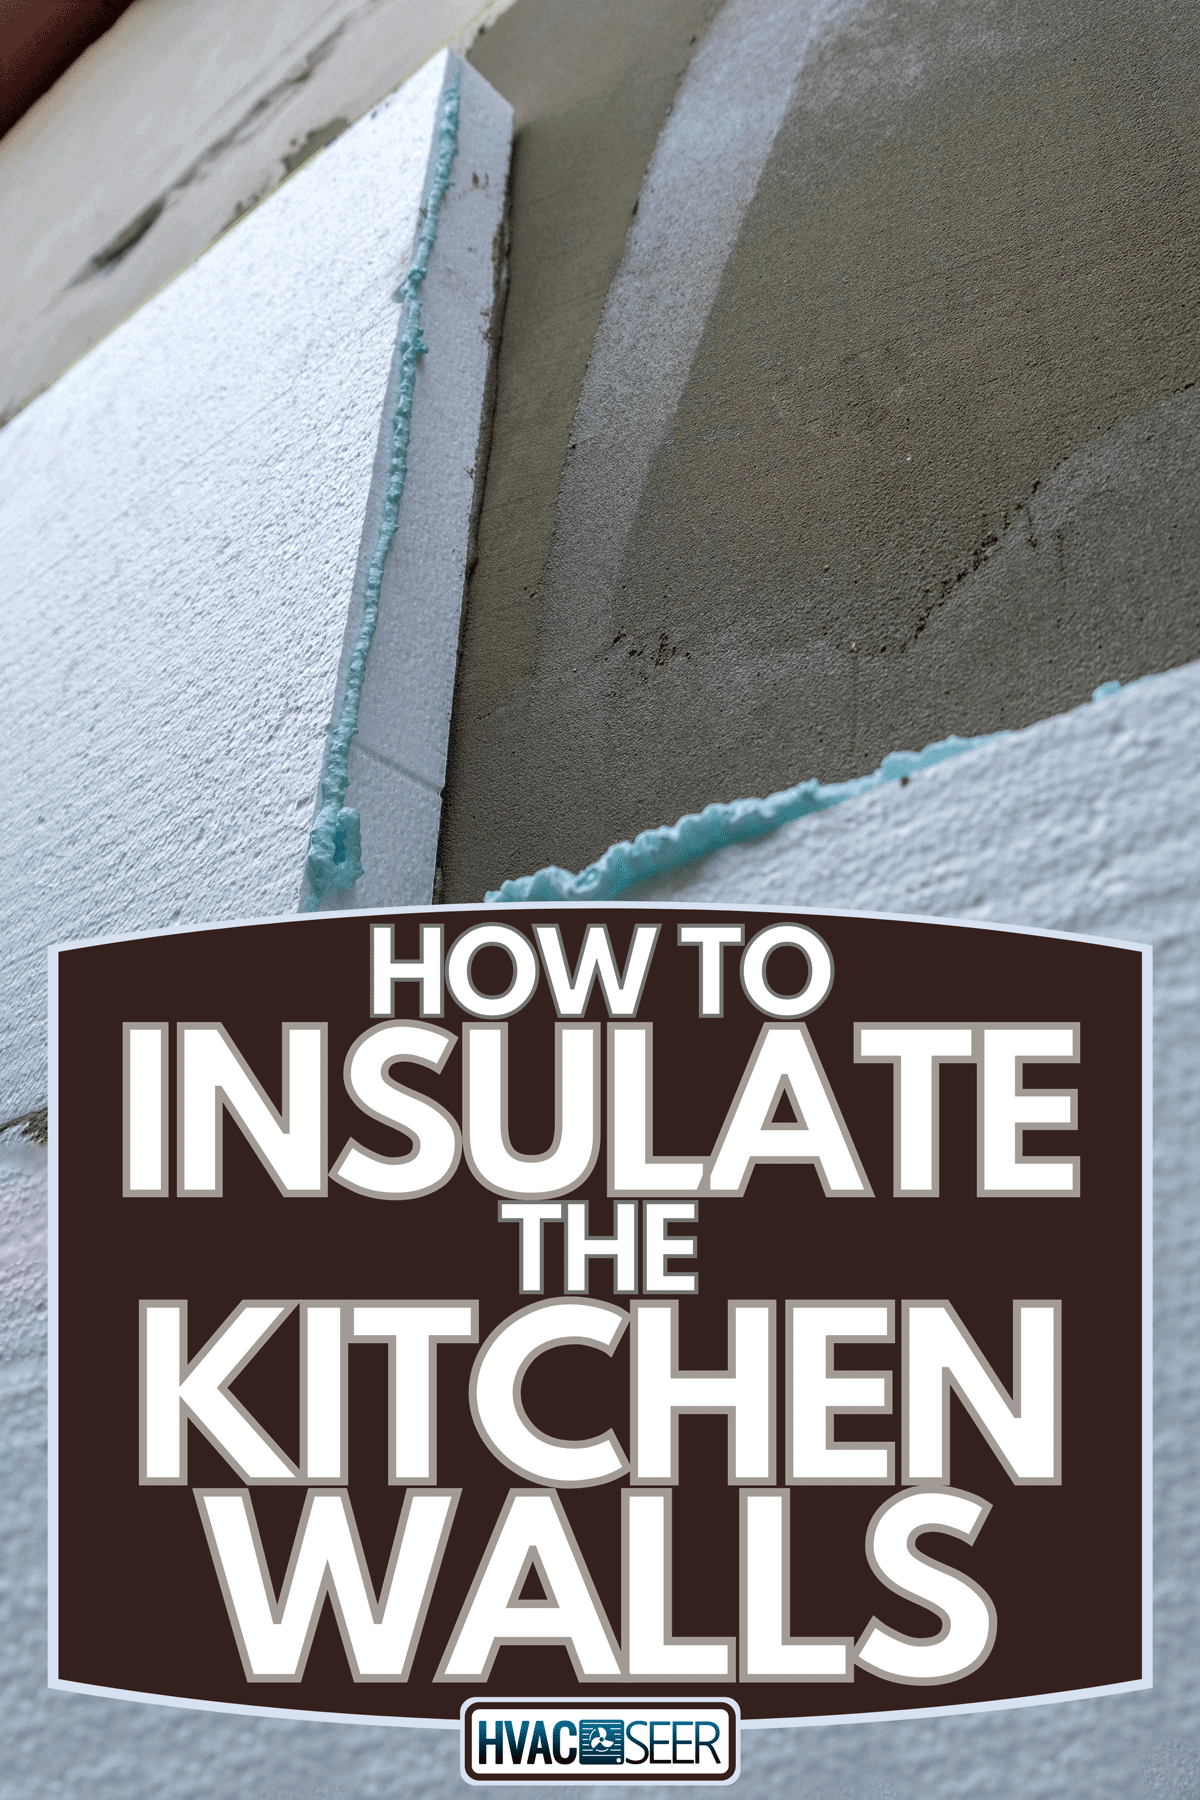 Installation of styrofoam insulation sheets on house facade wall for thermal protection, How To Insulate The Kitchen Walls